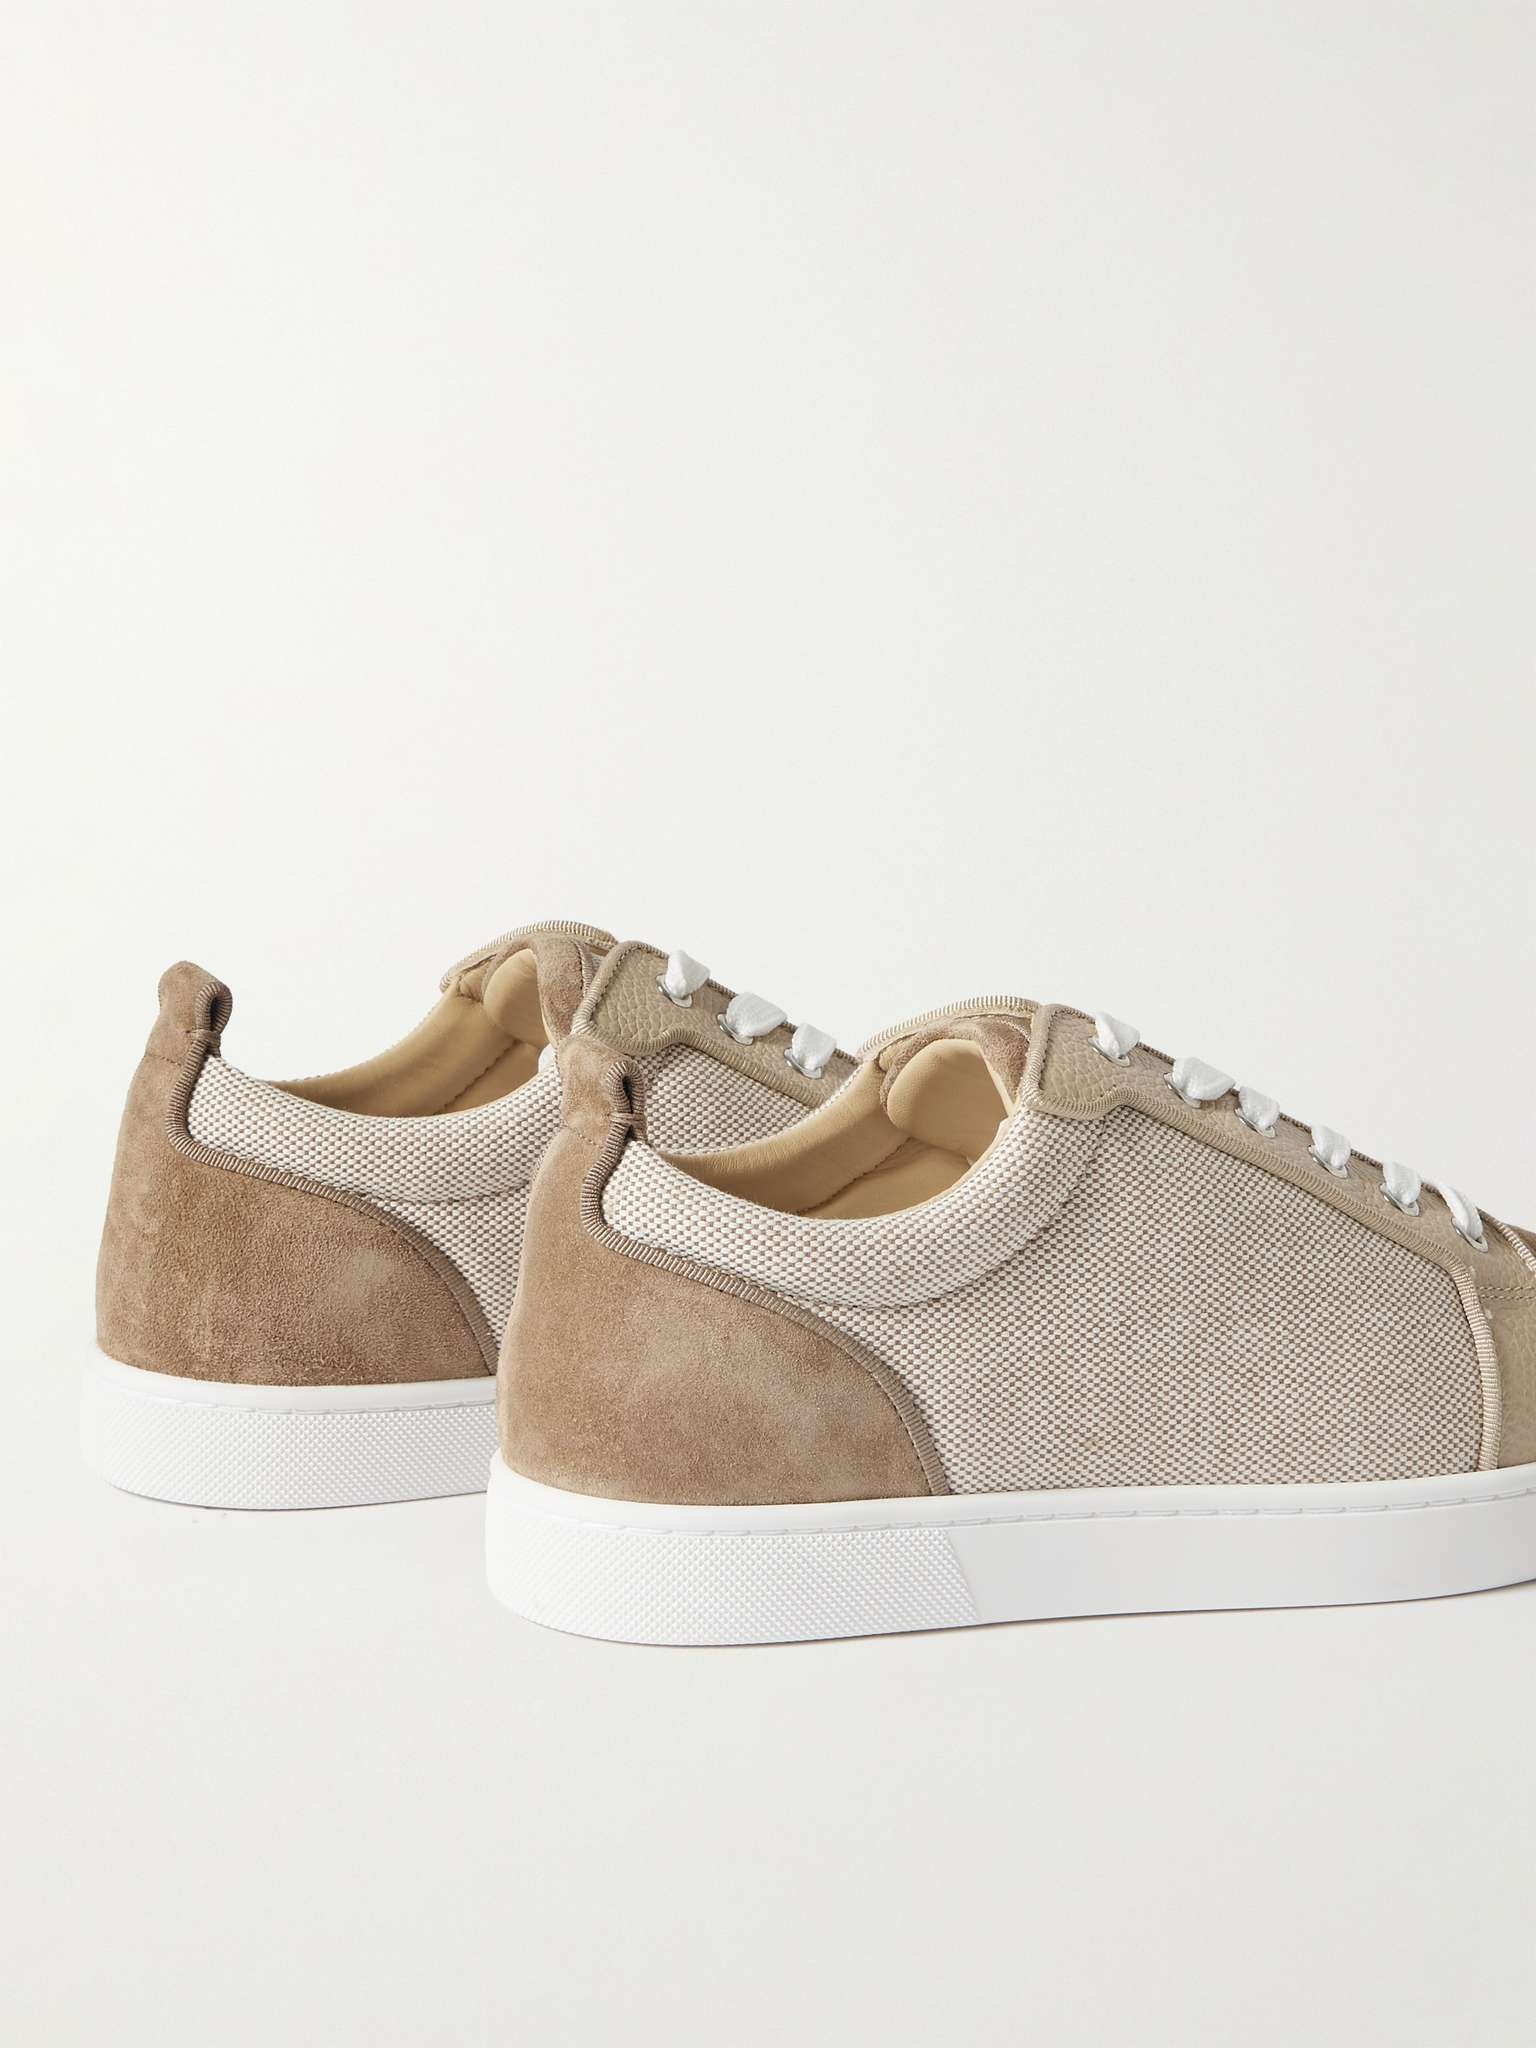 Louis Junior Linen, Leather and Suede Leather Sneakers - 5